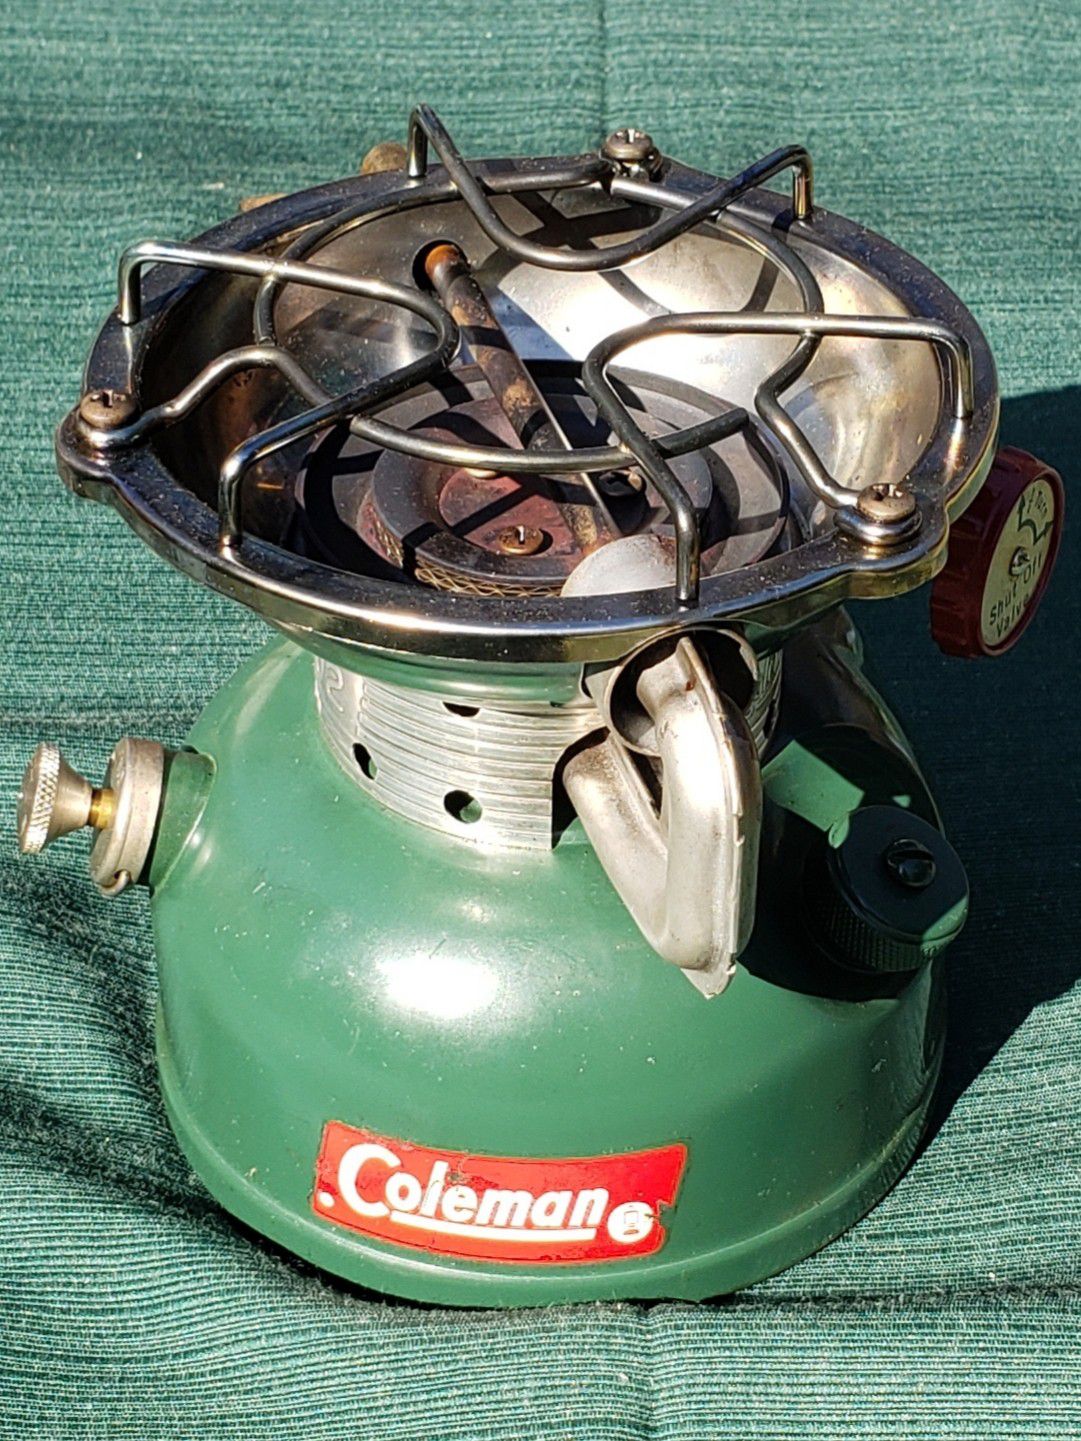 Vintage Coleman 502 Camping Stove